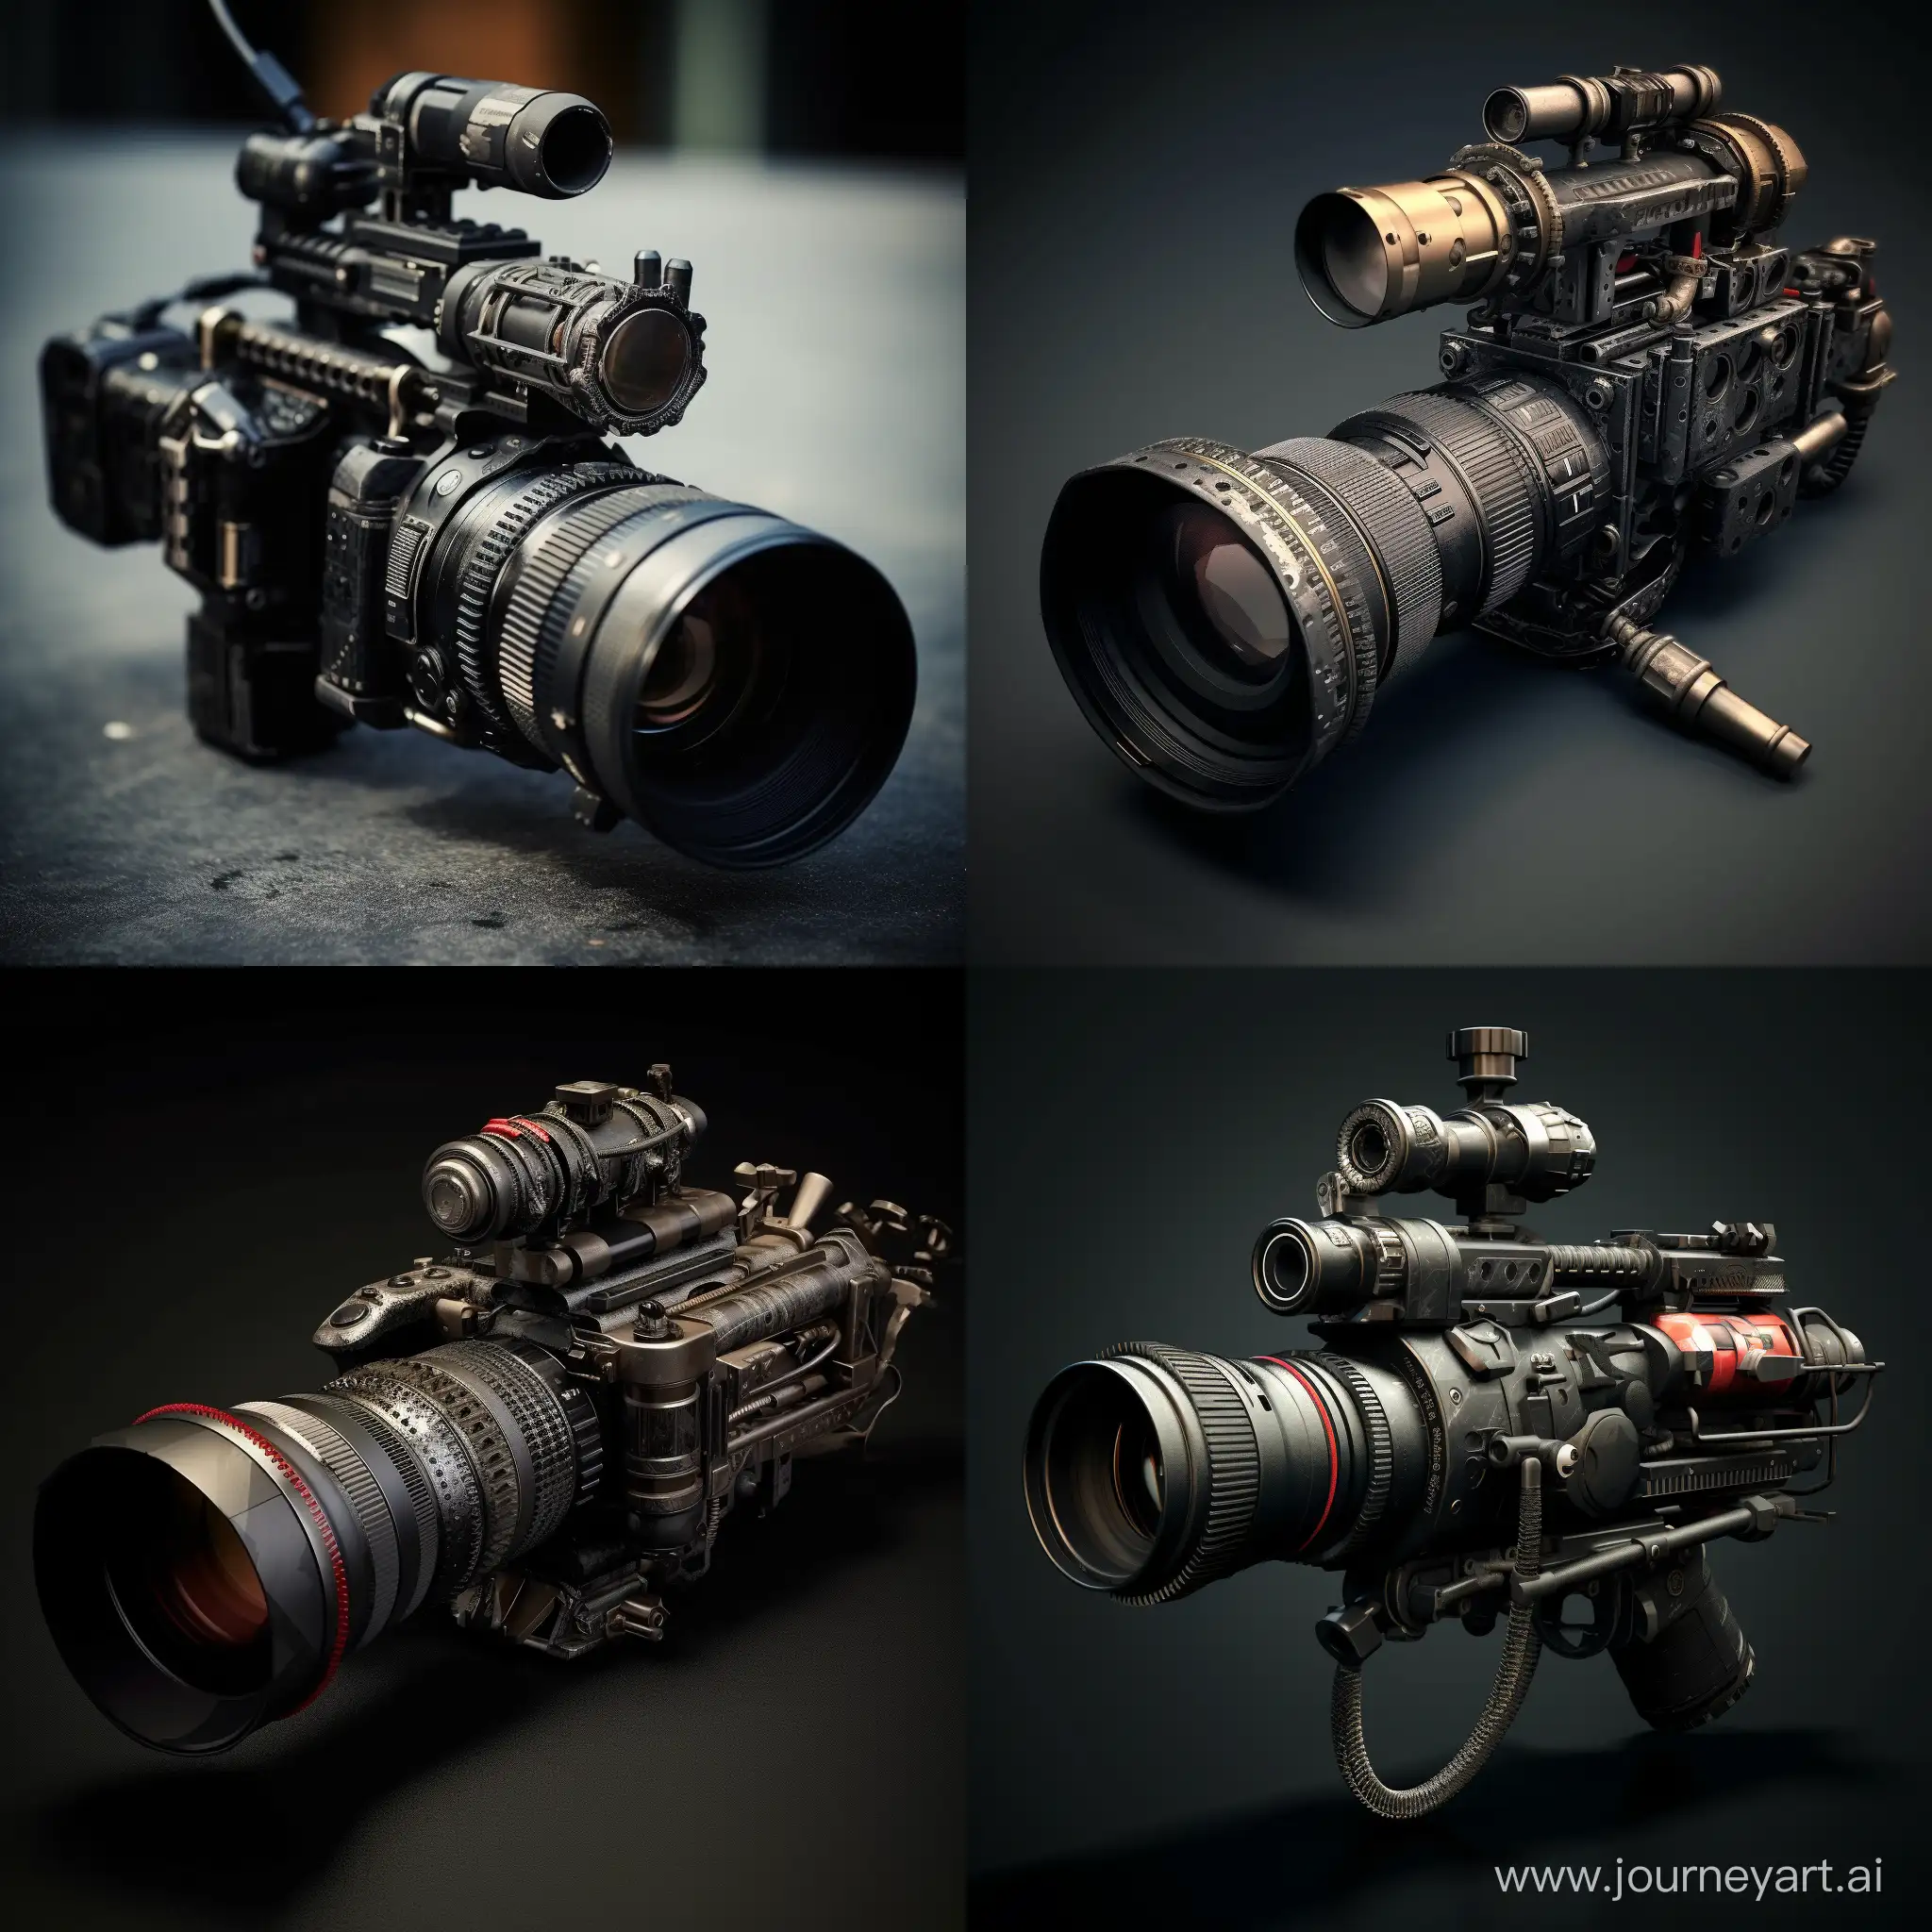 Unique-Camera-Design-Inspired-by-RPG7-Grenade-Launcher